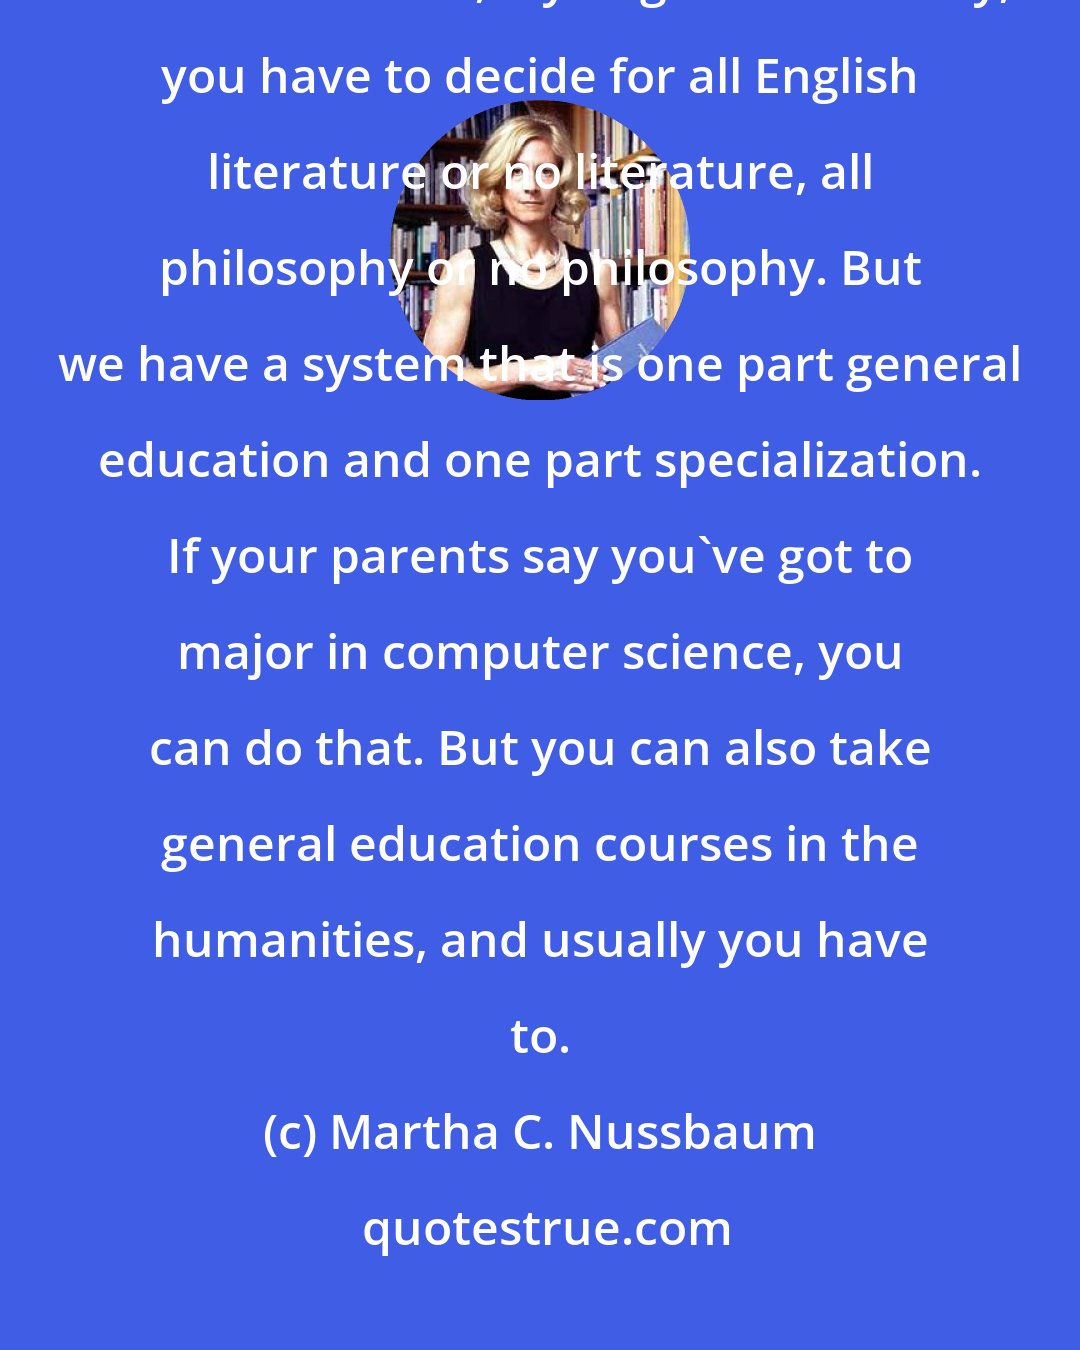 Martha C. Nussbaum: We are lucky in the United States to have our liberal arts system. In most countries, if you go to university, you have to decide for all English literature or no literature, all philosophy or no philosophy. But we have a system that is one part general education and one part specialization. If your parents say you've got to major in computer science, you can do that. But you can also take general education courses in the humanities, and usually you have to.